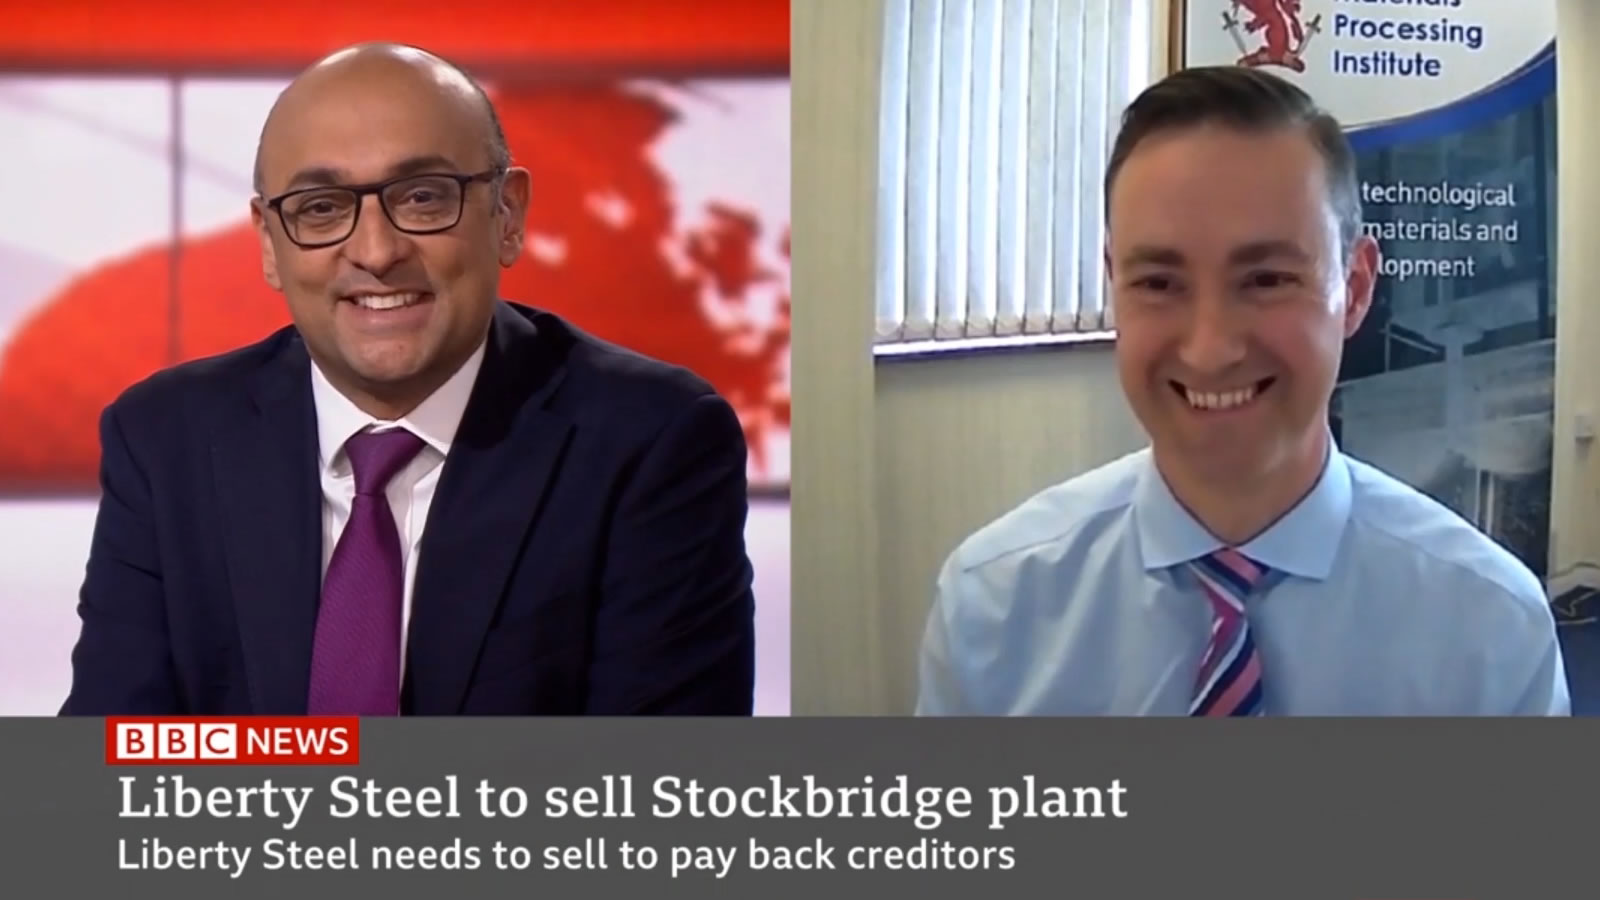 Chris McDonald comments on the selling of the Liberty Steel Steel Stockbridge plant on BBC News - May 2021